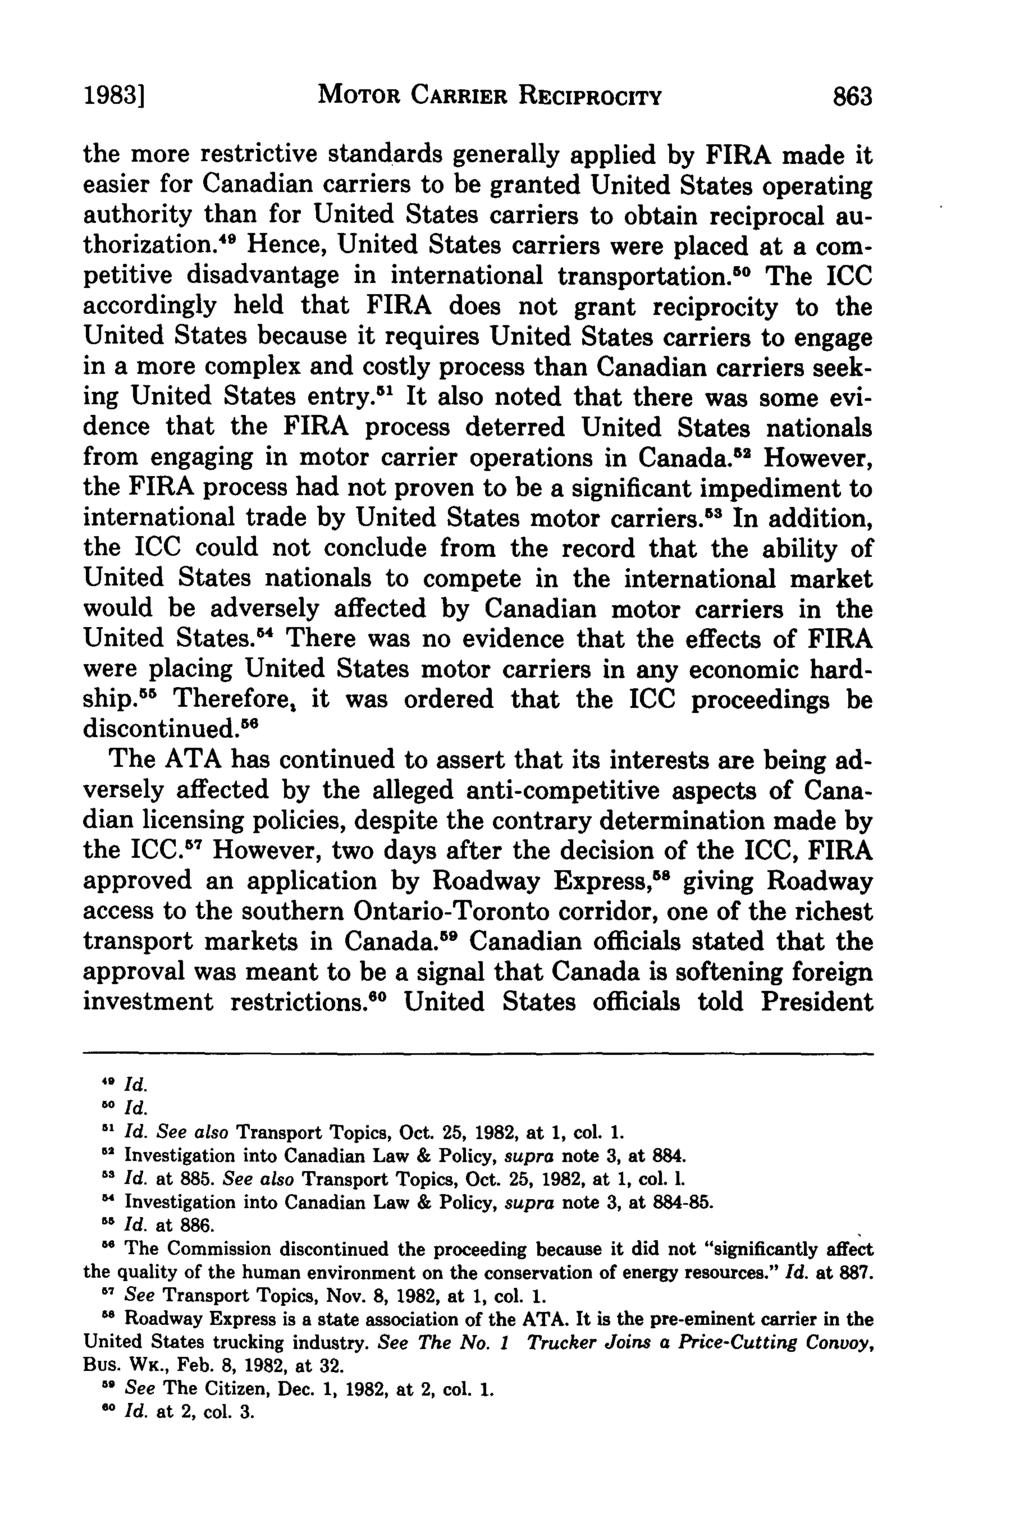 1983] MOTOR CARRIER RECIPROCITY 863 the more restrictive standards generally applied by FIRA made it easier for Canadian carriers to be granted United States operating authority than for United